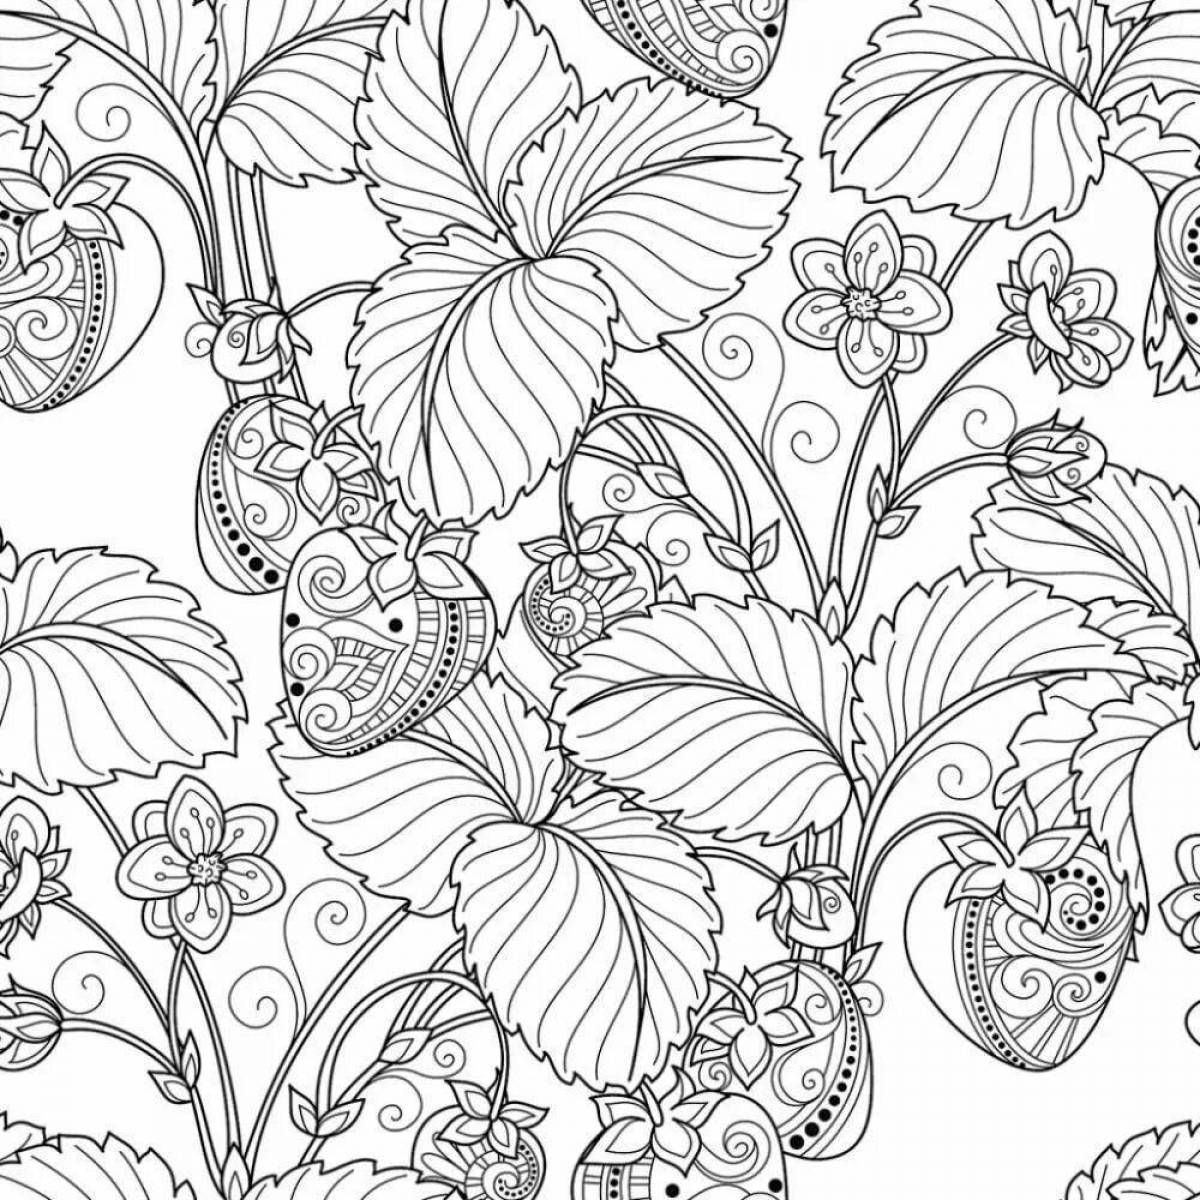 Blissful botanical coloring book